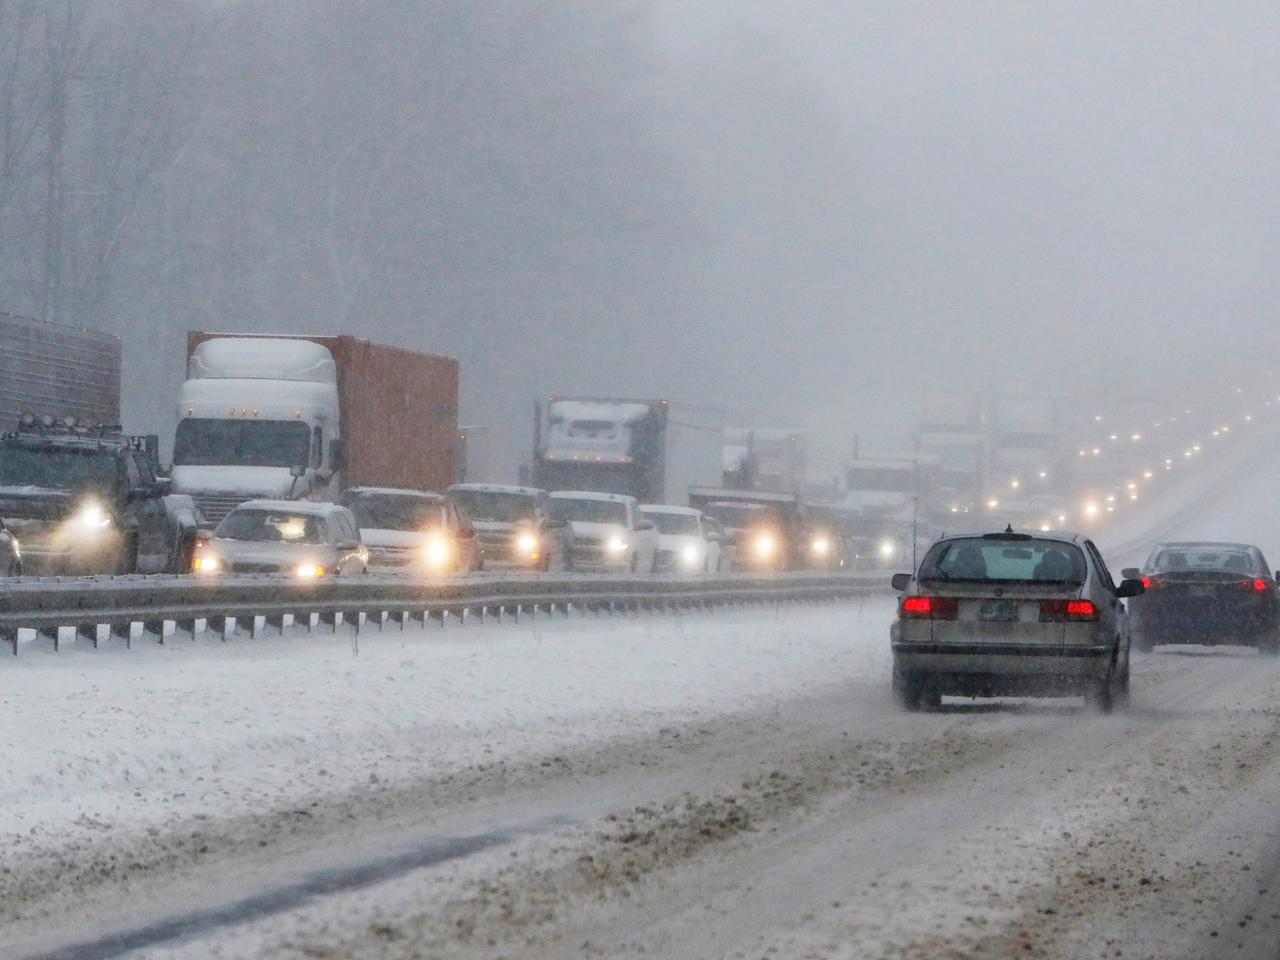 Northbound traffic on I-95 was at a standstill on December 30 after a tractor trailer jackknifed in a snowstorm.